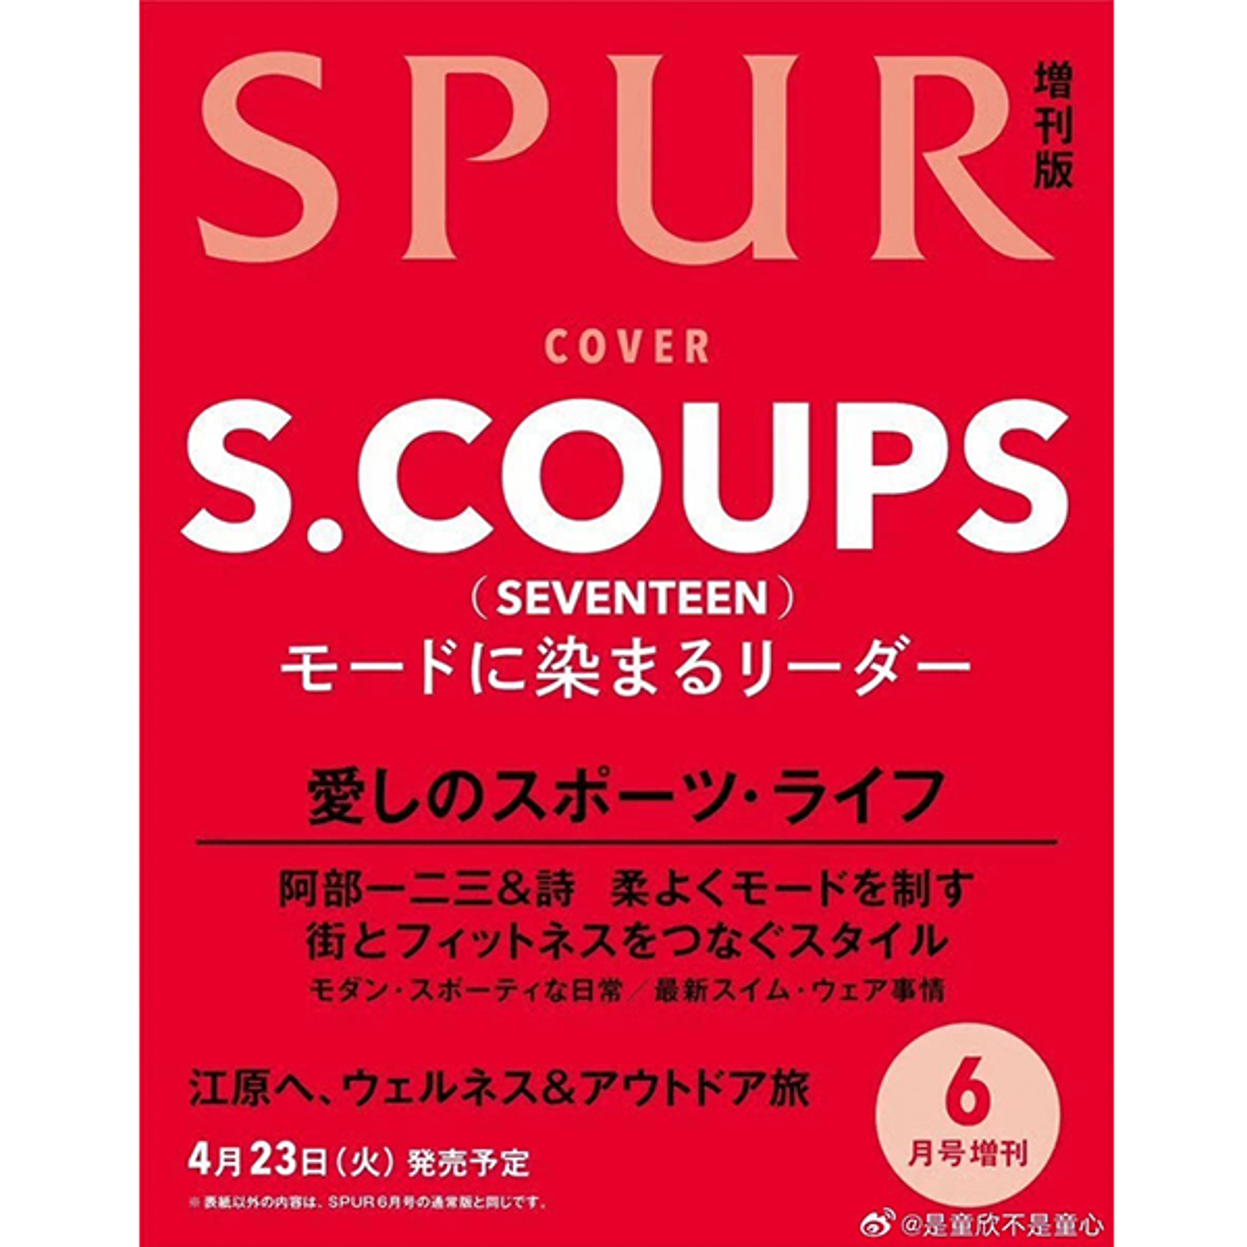 SPUR June issue (Special issue) (Cover: SEVENTEEN: S.Coups) (Japanese magazine)